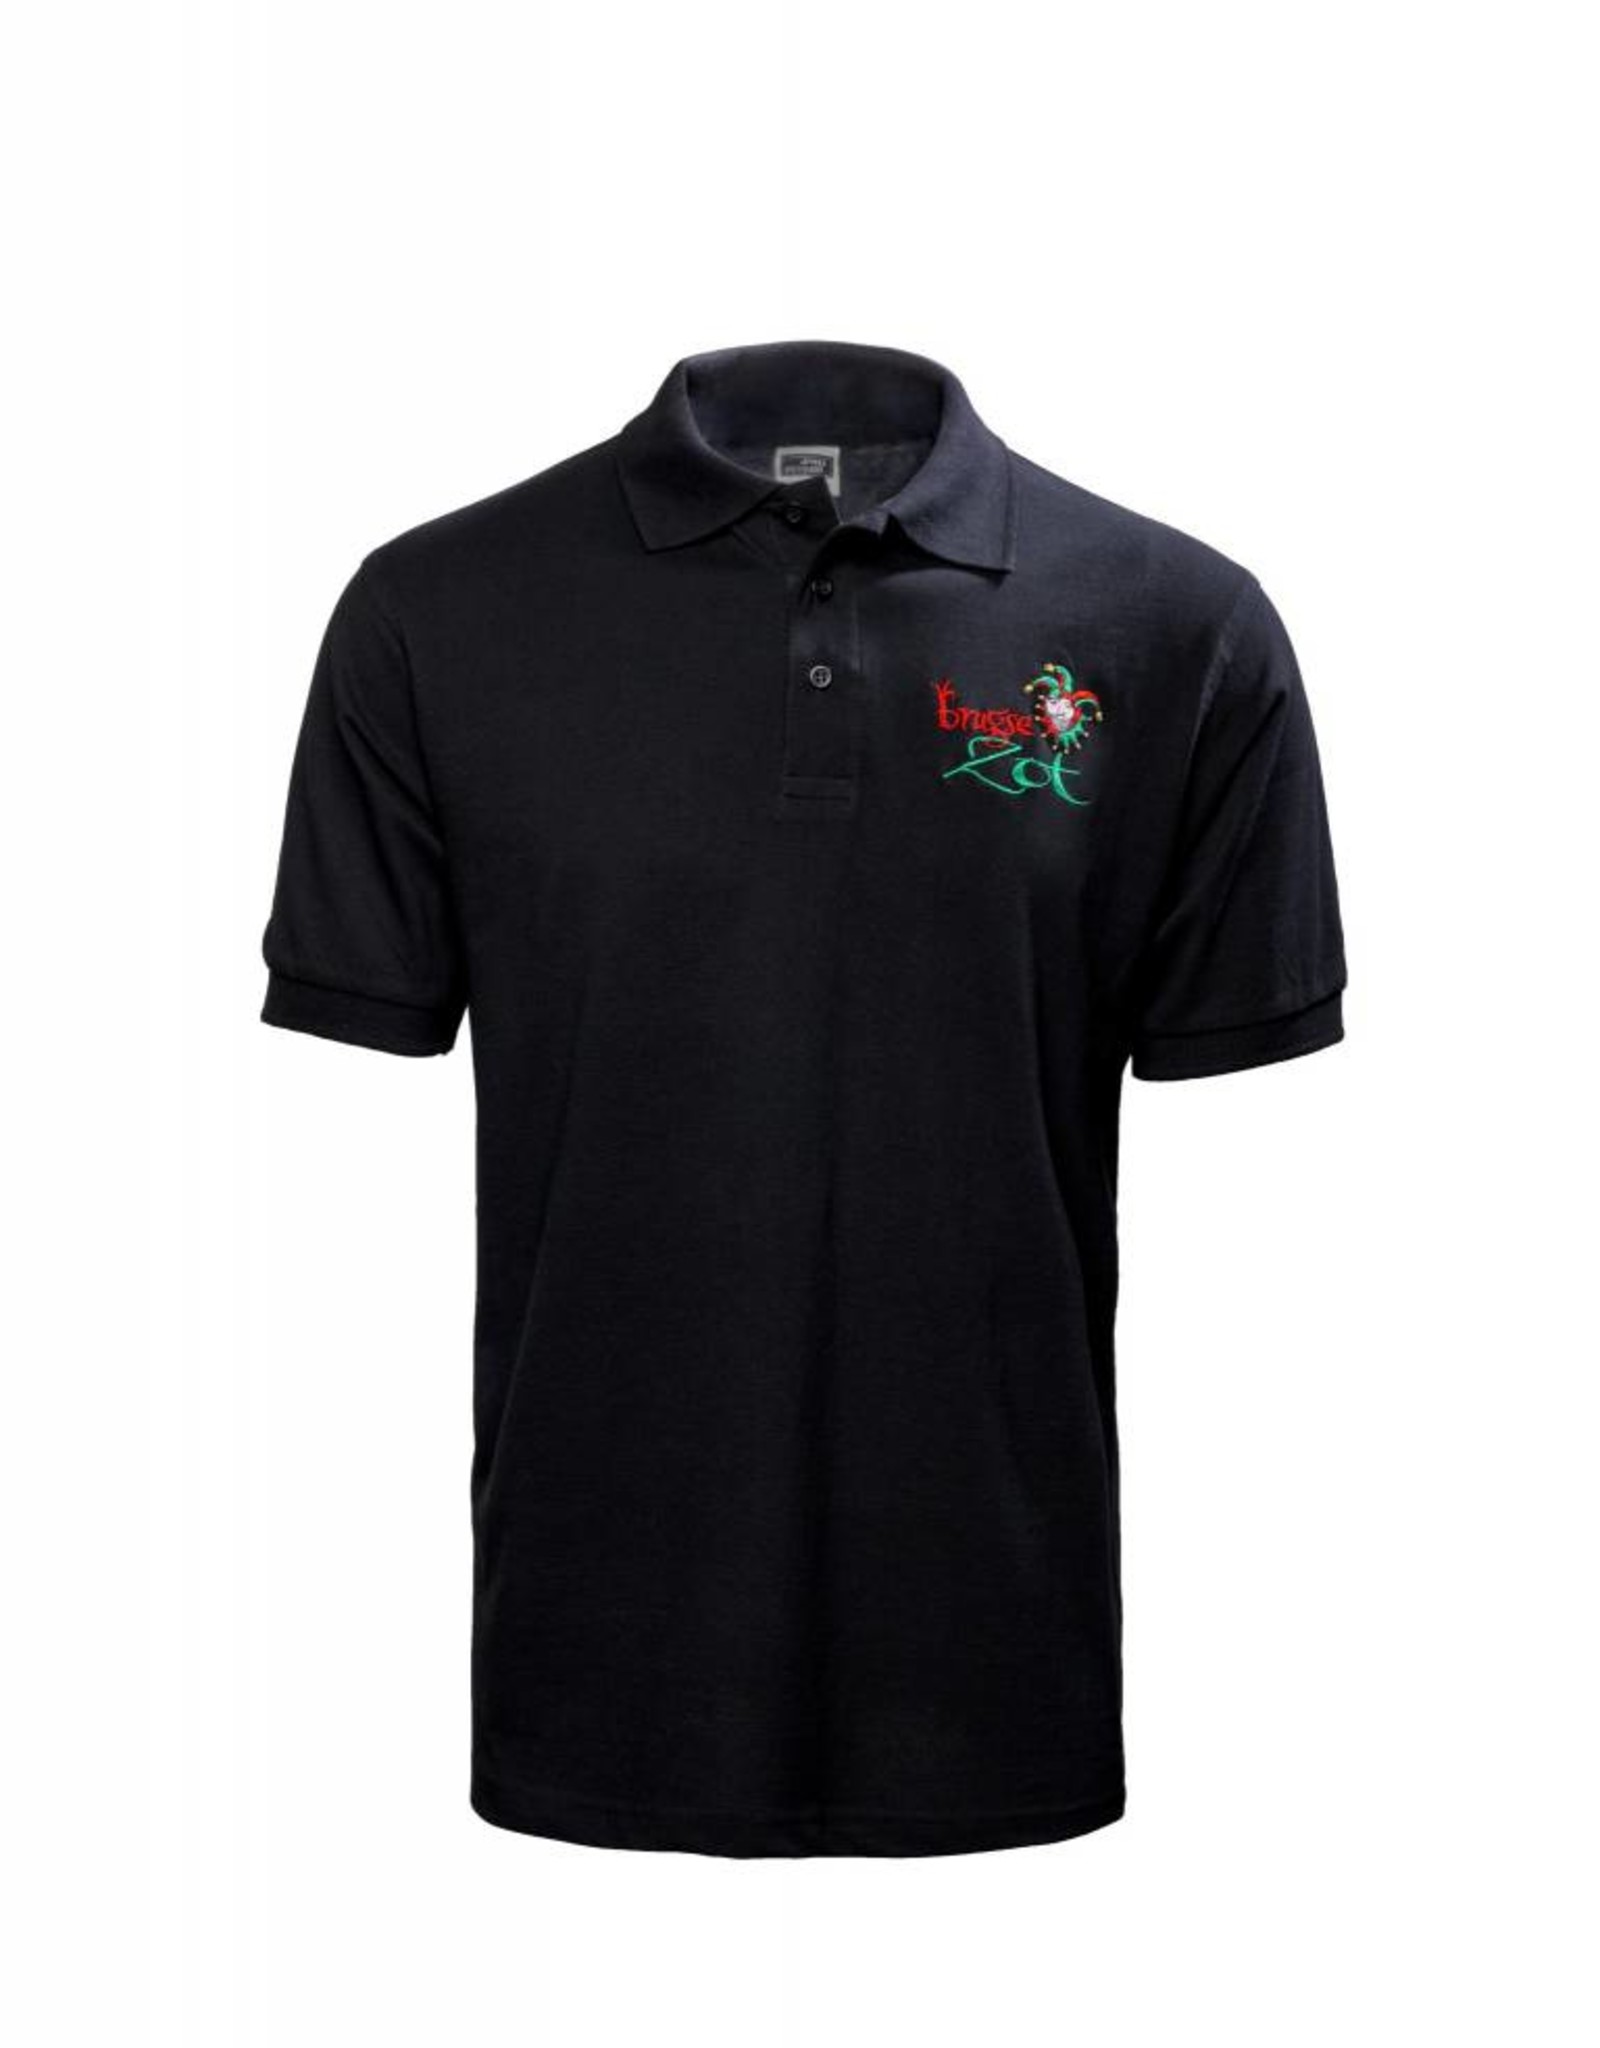 Brugse Zot Brugse Zot polo homme